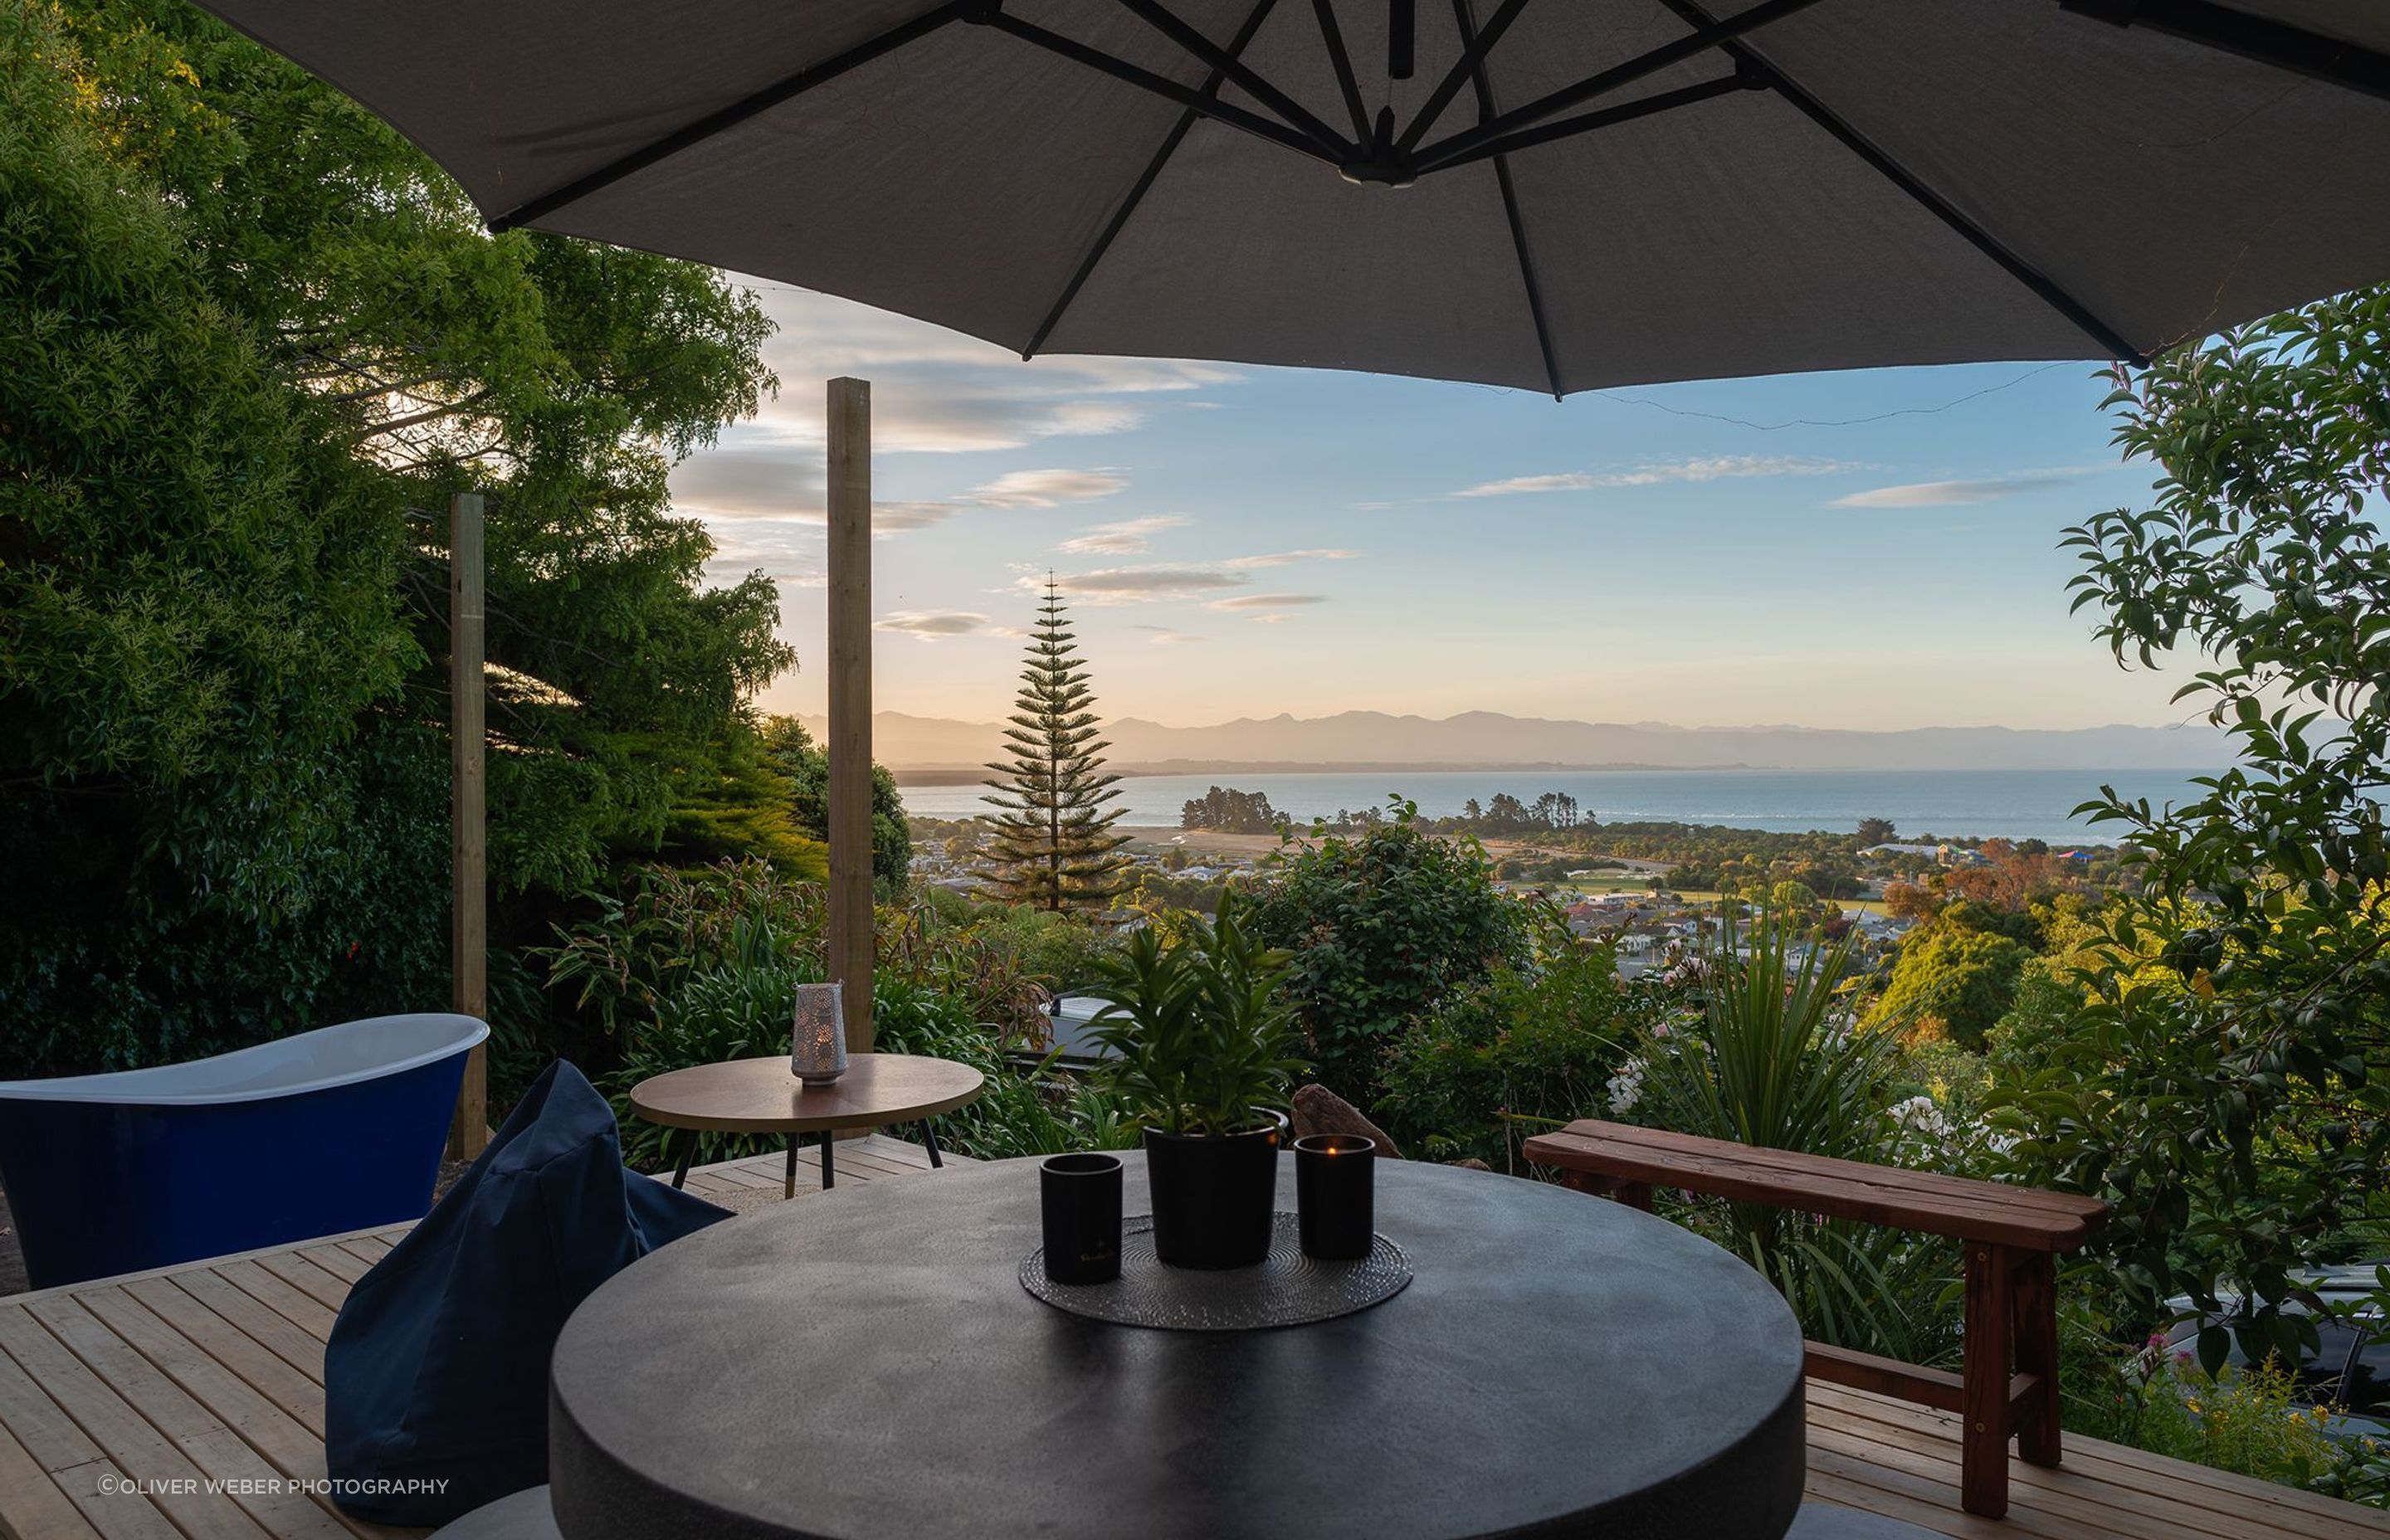 Outdoor deck with stunning views over the Tasman Bay